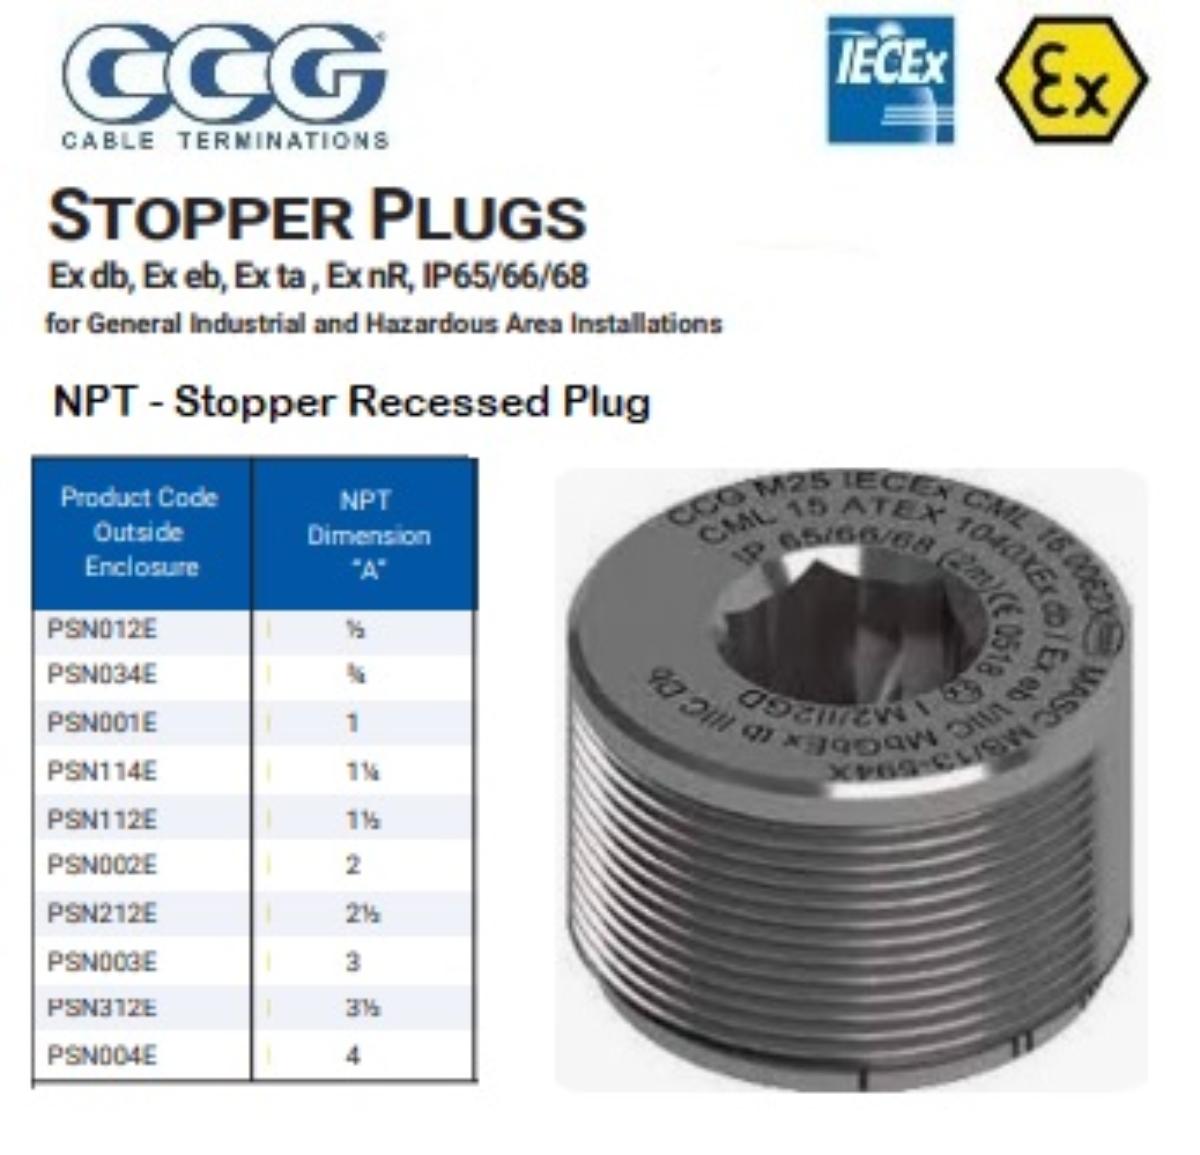 PLUGSTOPPER EXD/EXE O/SIDE ENC 3/4IN NPT